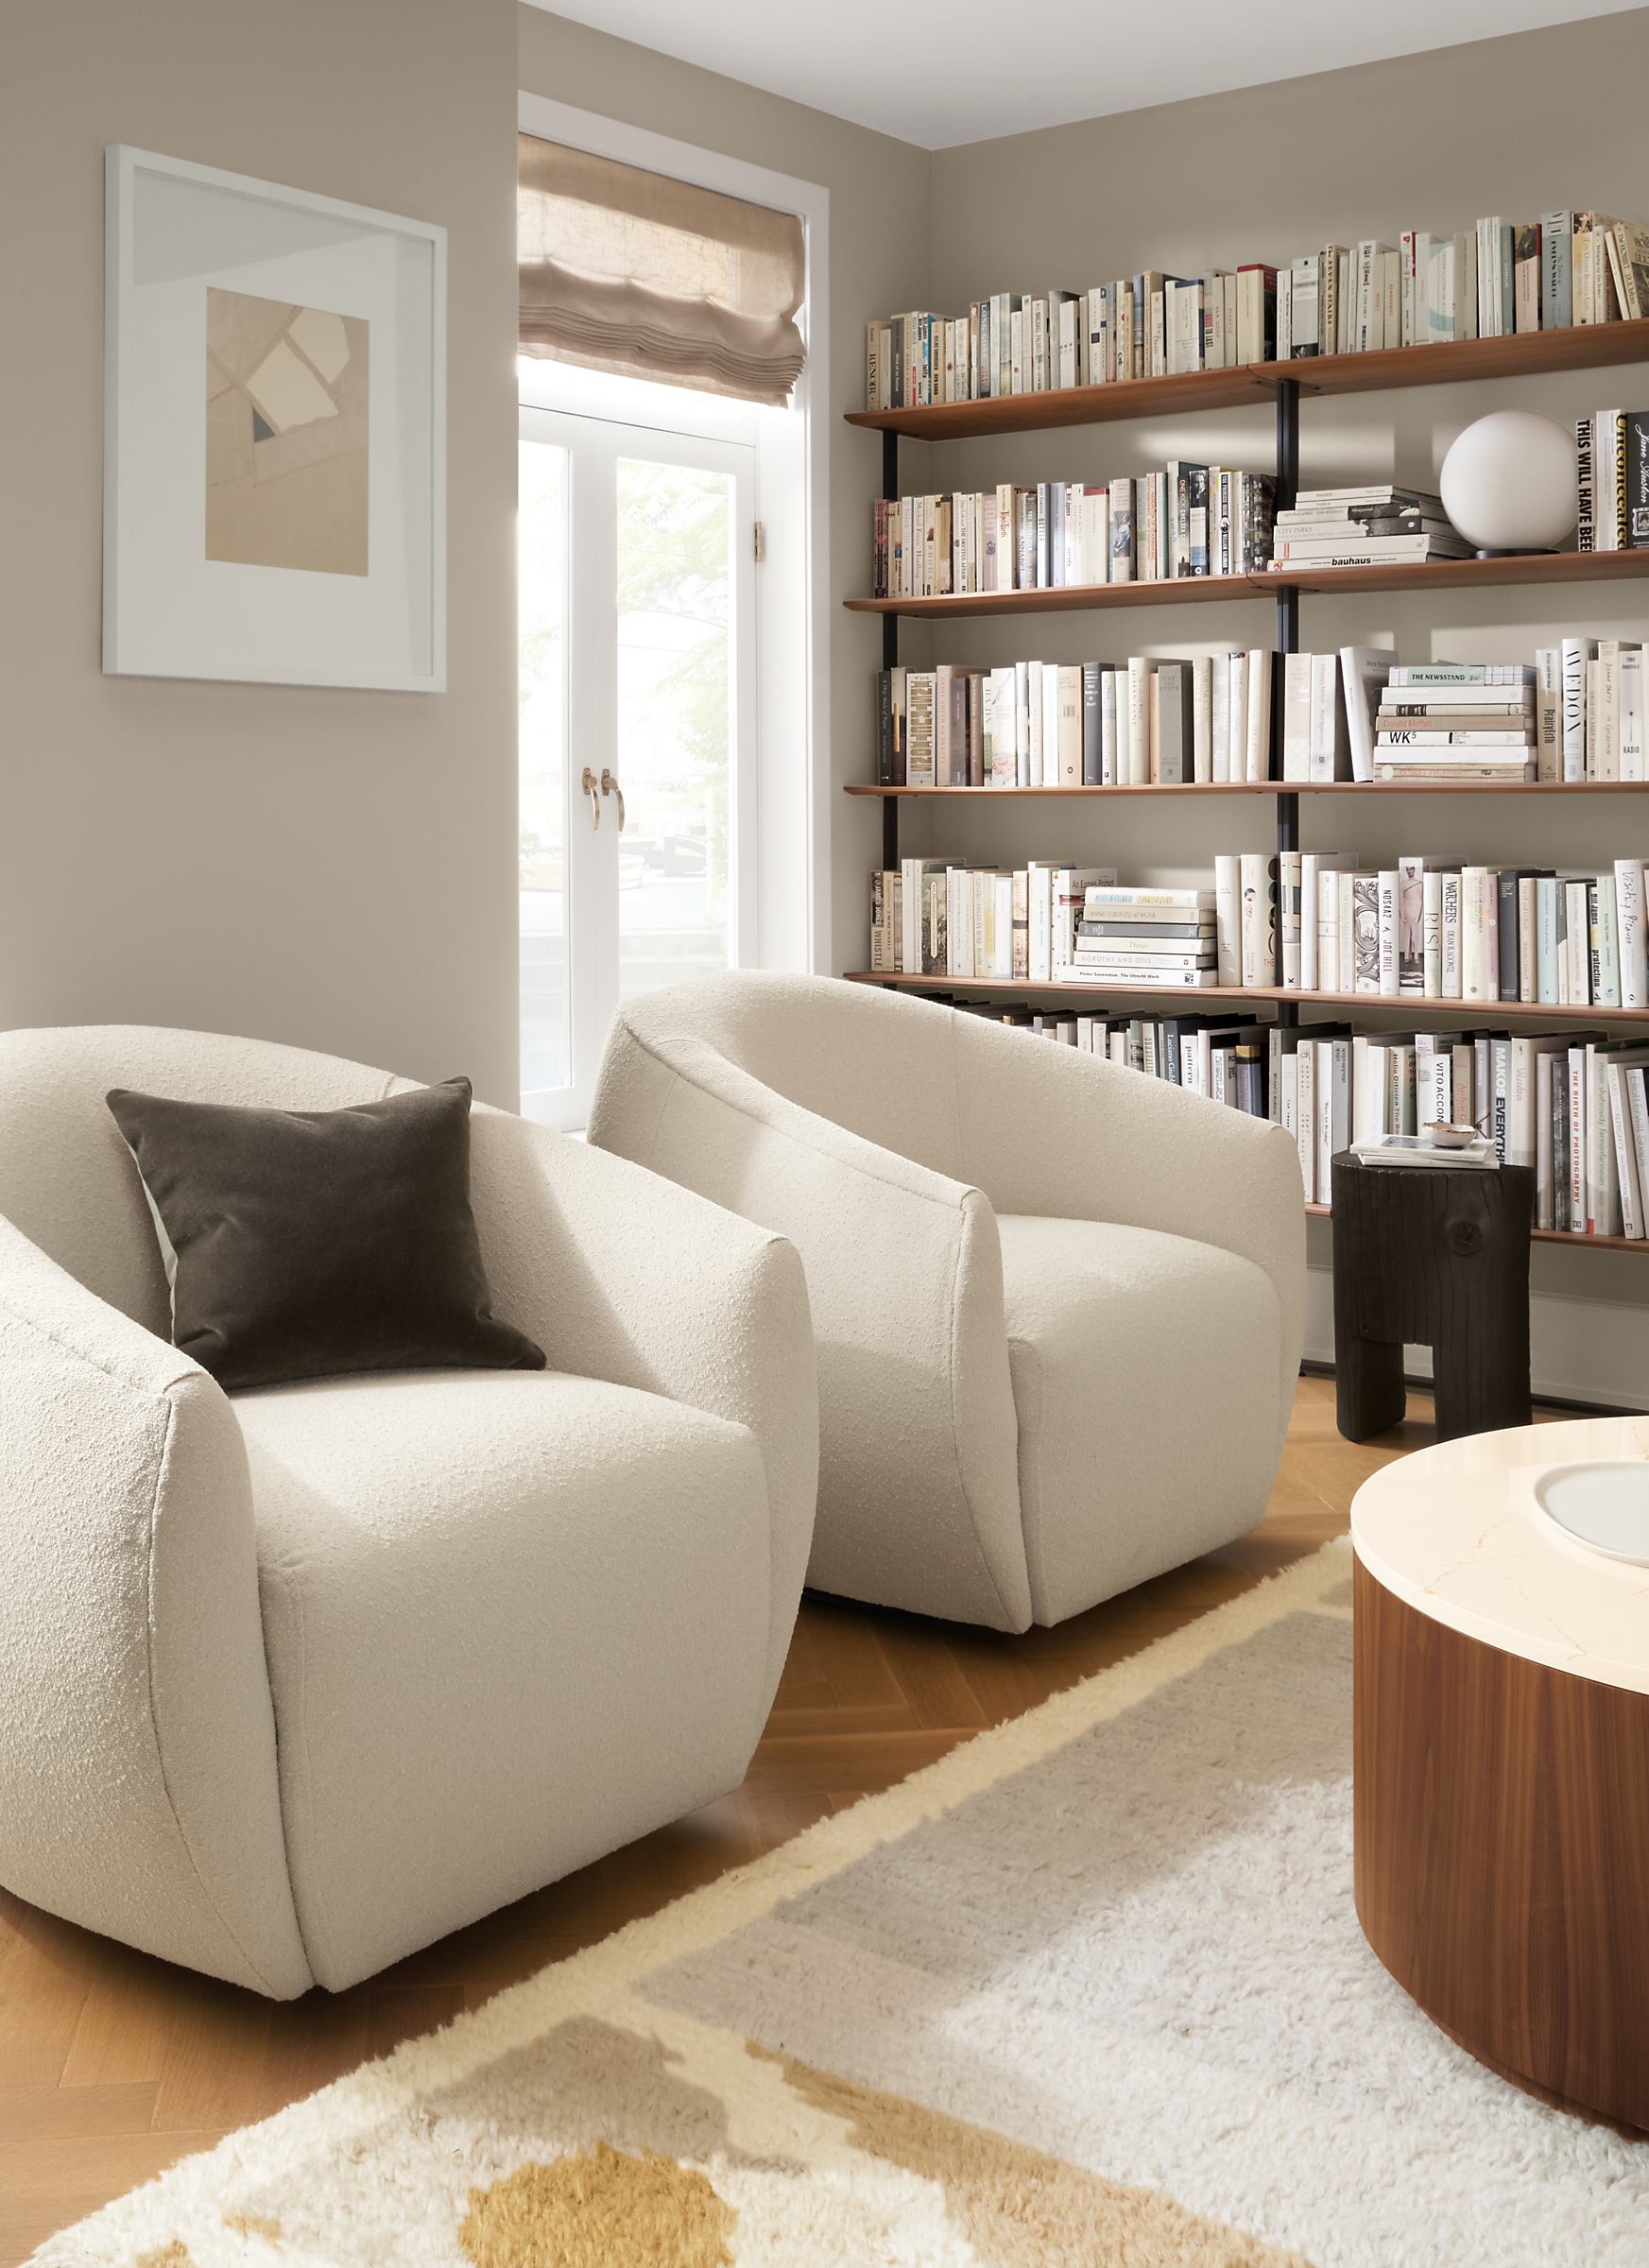 Room setting with two Mora swivel chairs with  Liam 36-round Coffee Table in Walnut and Beam bookshelves line the wall.